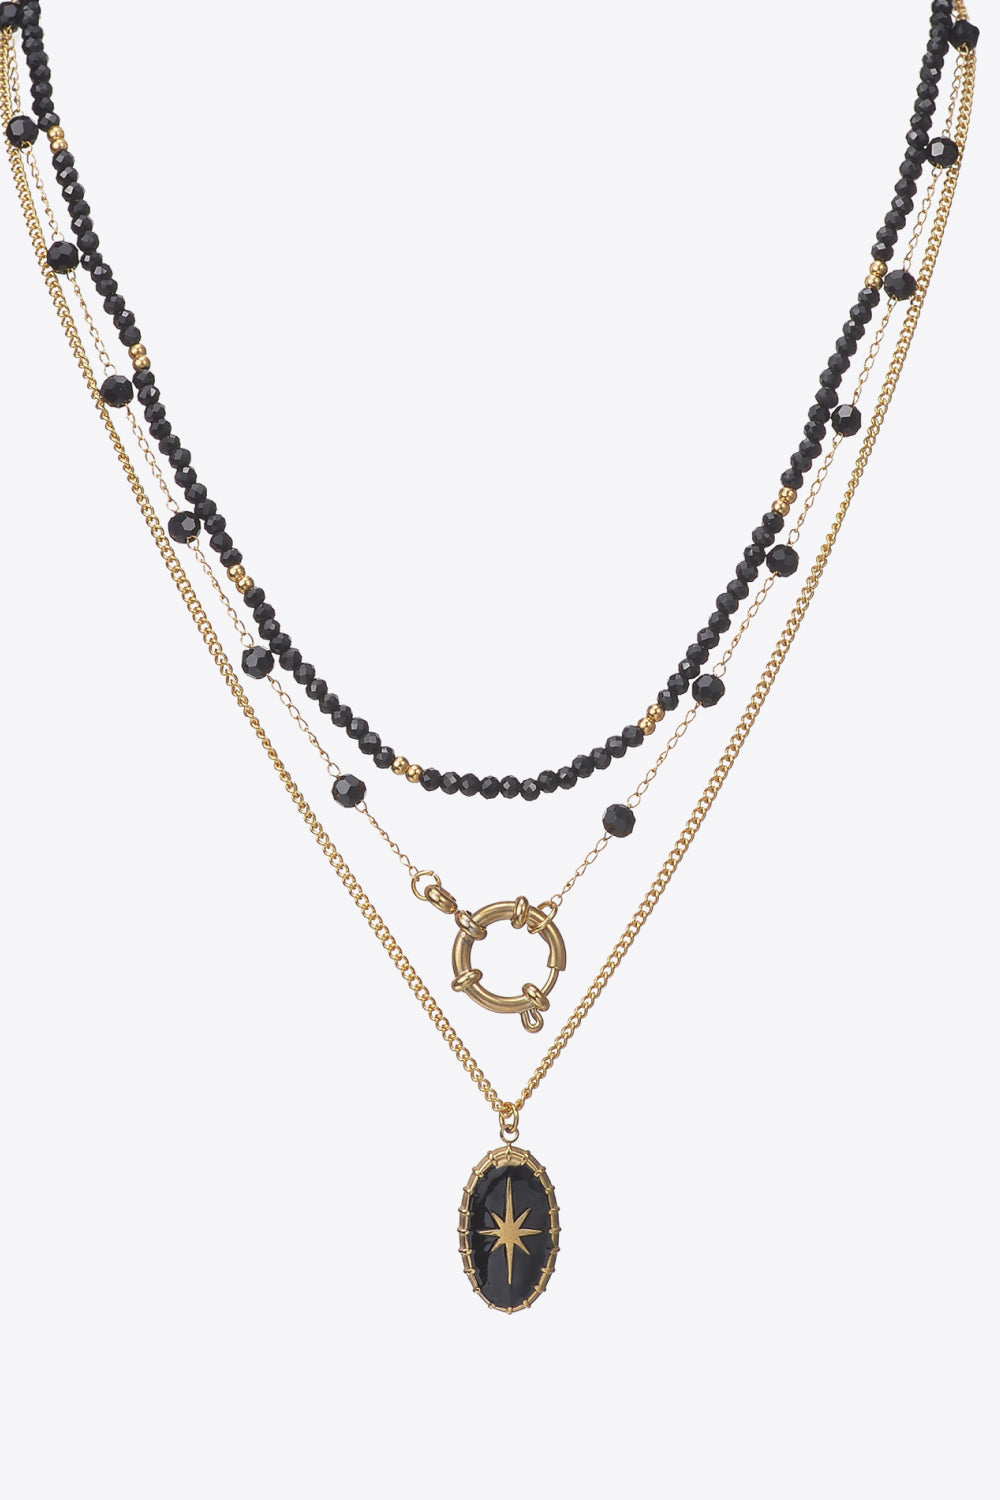 BLACK/GOLD ONE SIZE Three-Piece Stainless Steel Necklace Set - necklace at TFC&H Co.